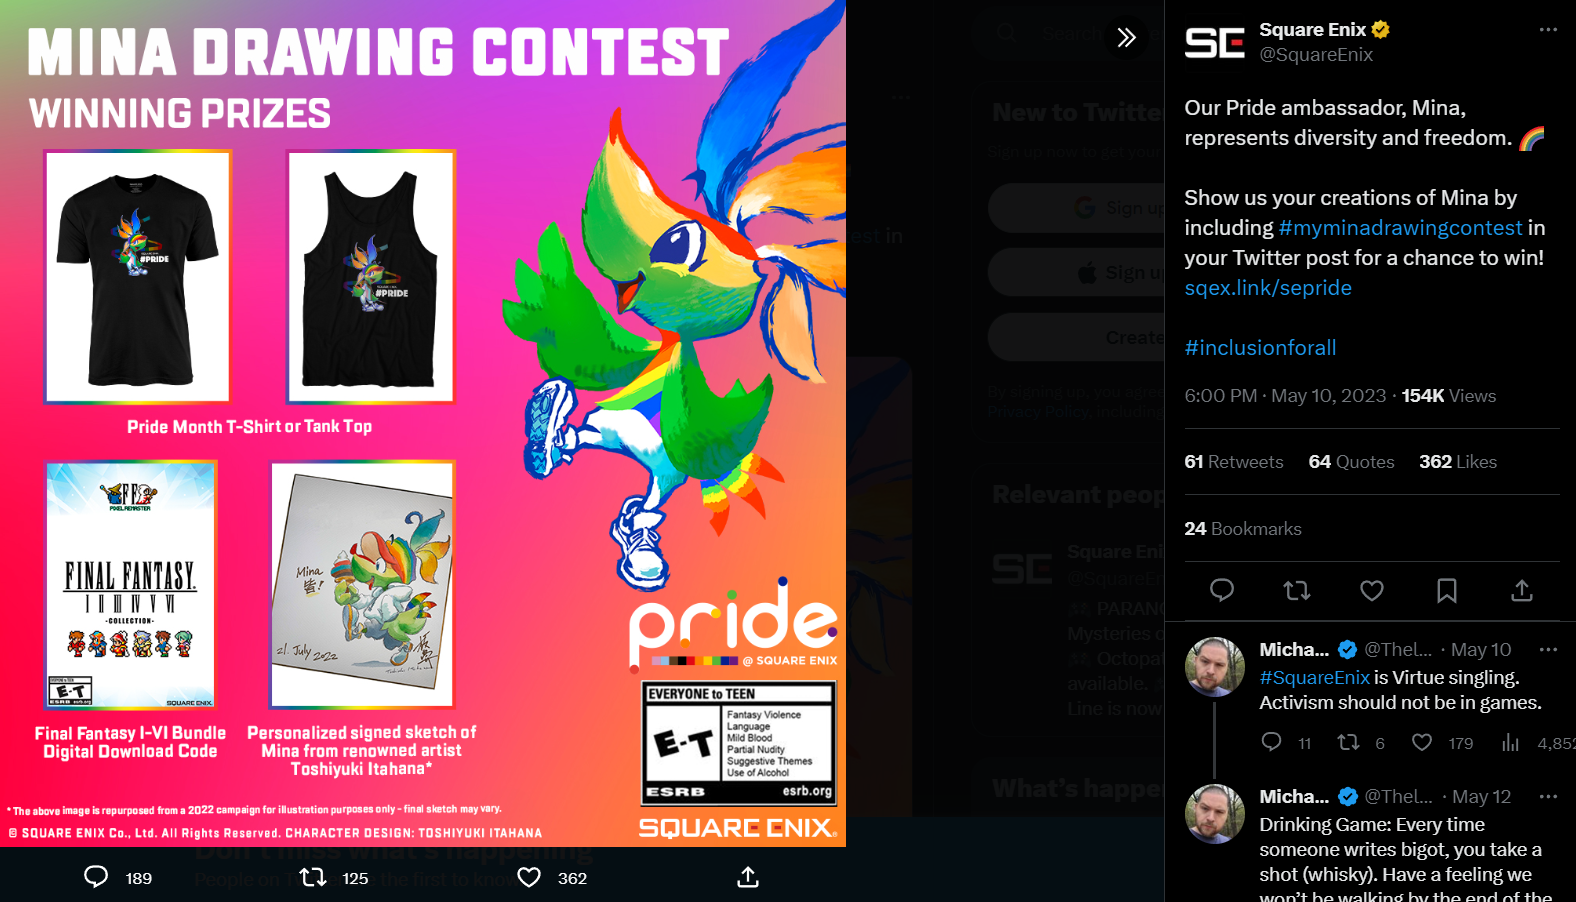 Square Enix announces a drawing contest with their Pride ambassador Mina via Twitter